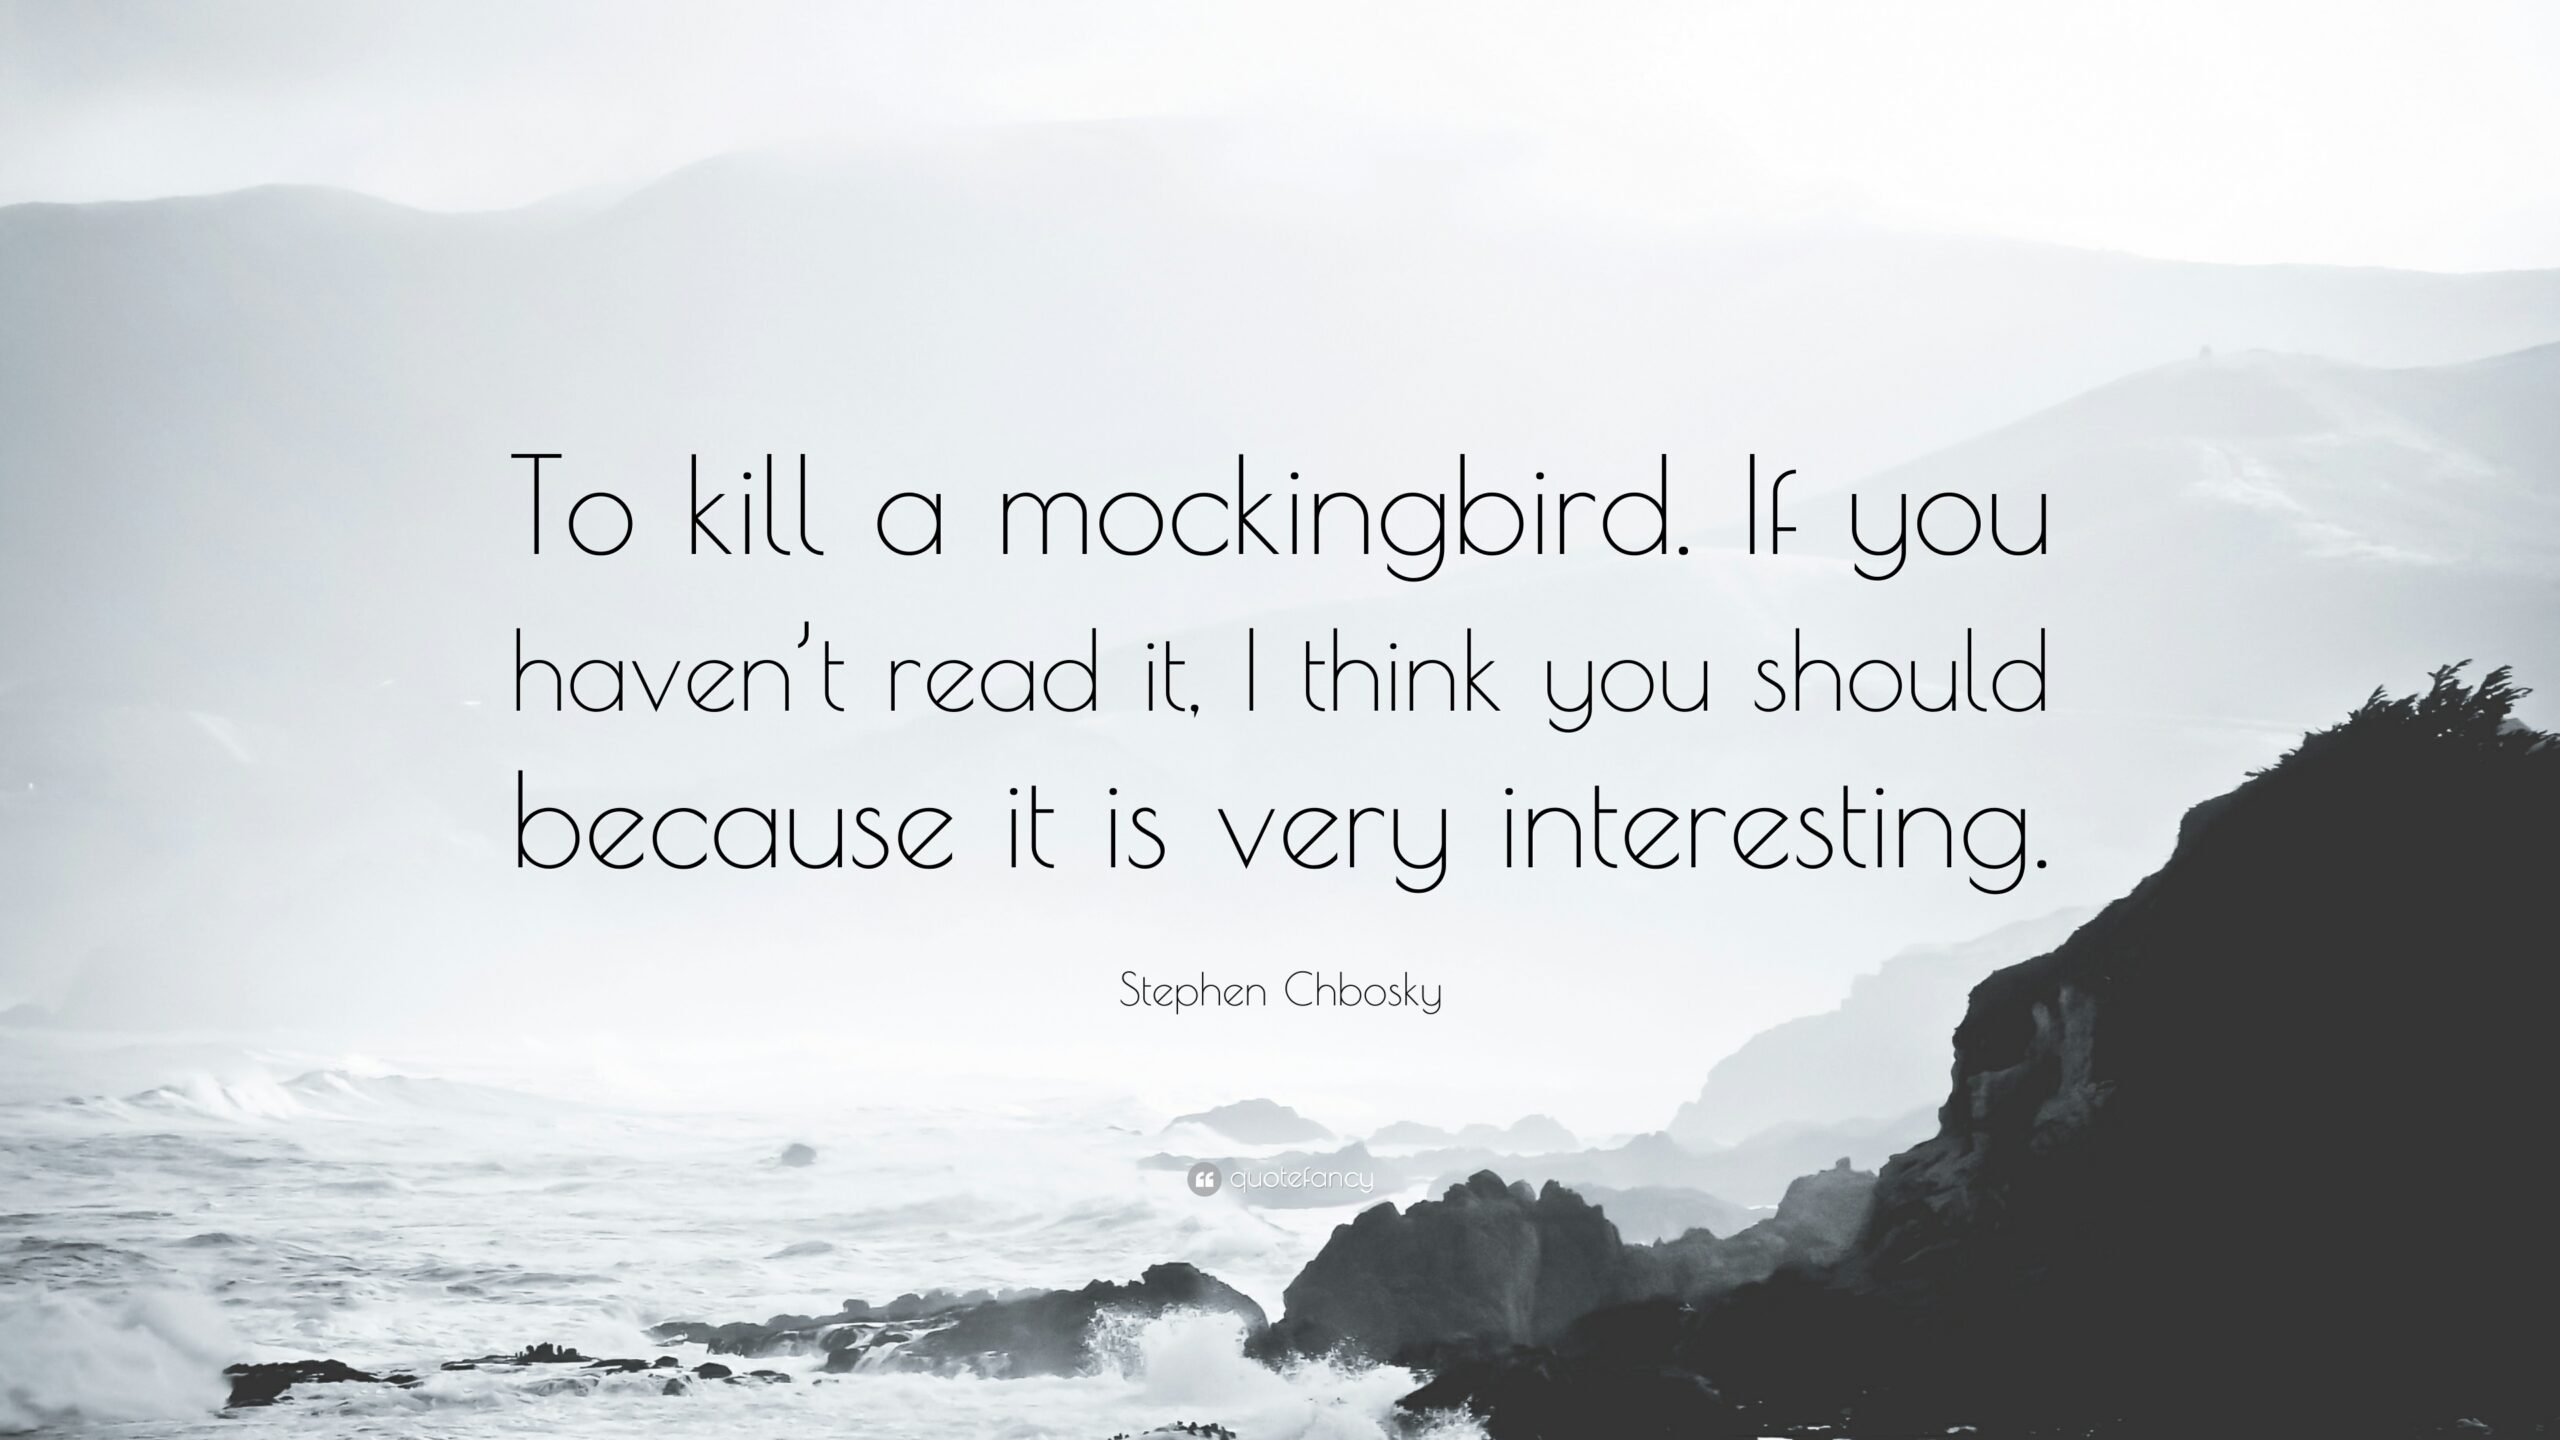 Stephen Chbosky Quote “To kill a mockingbird If you haven’t read